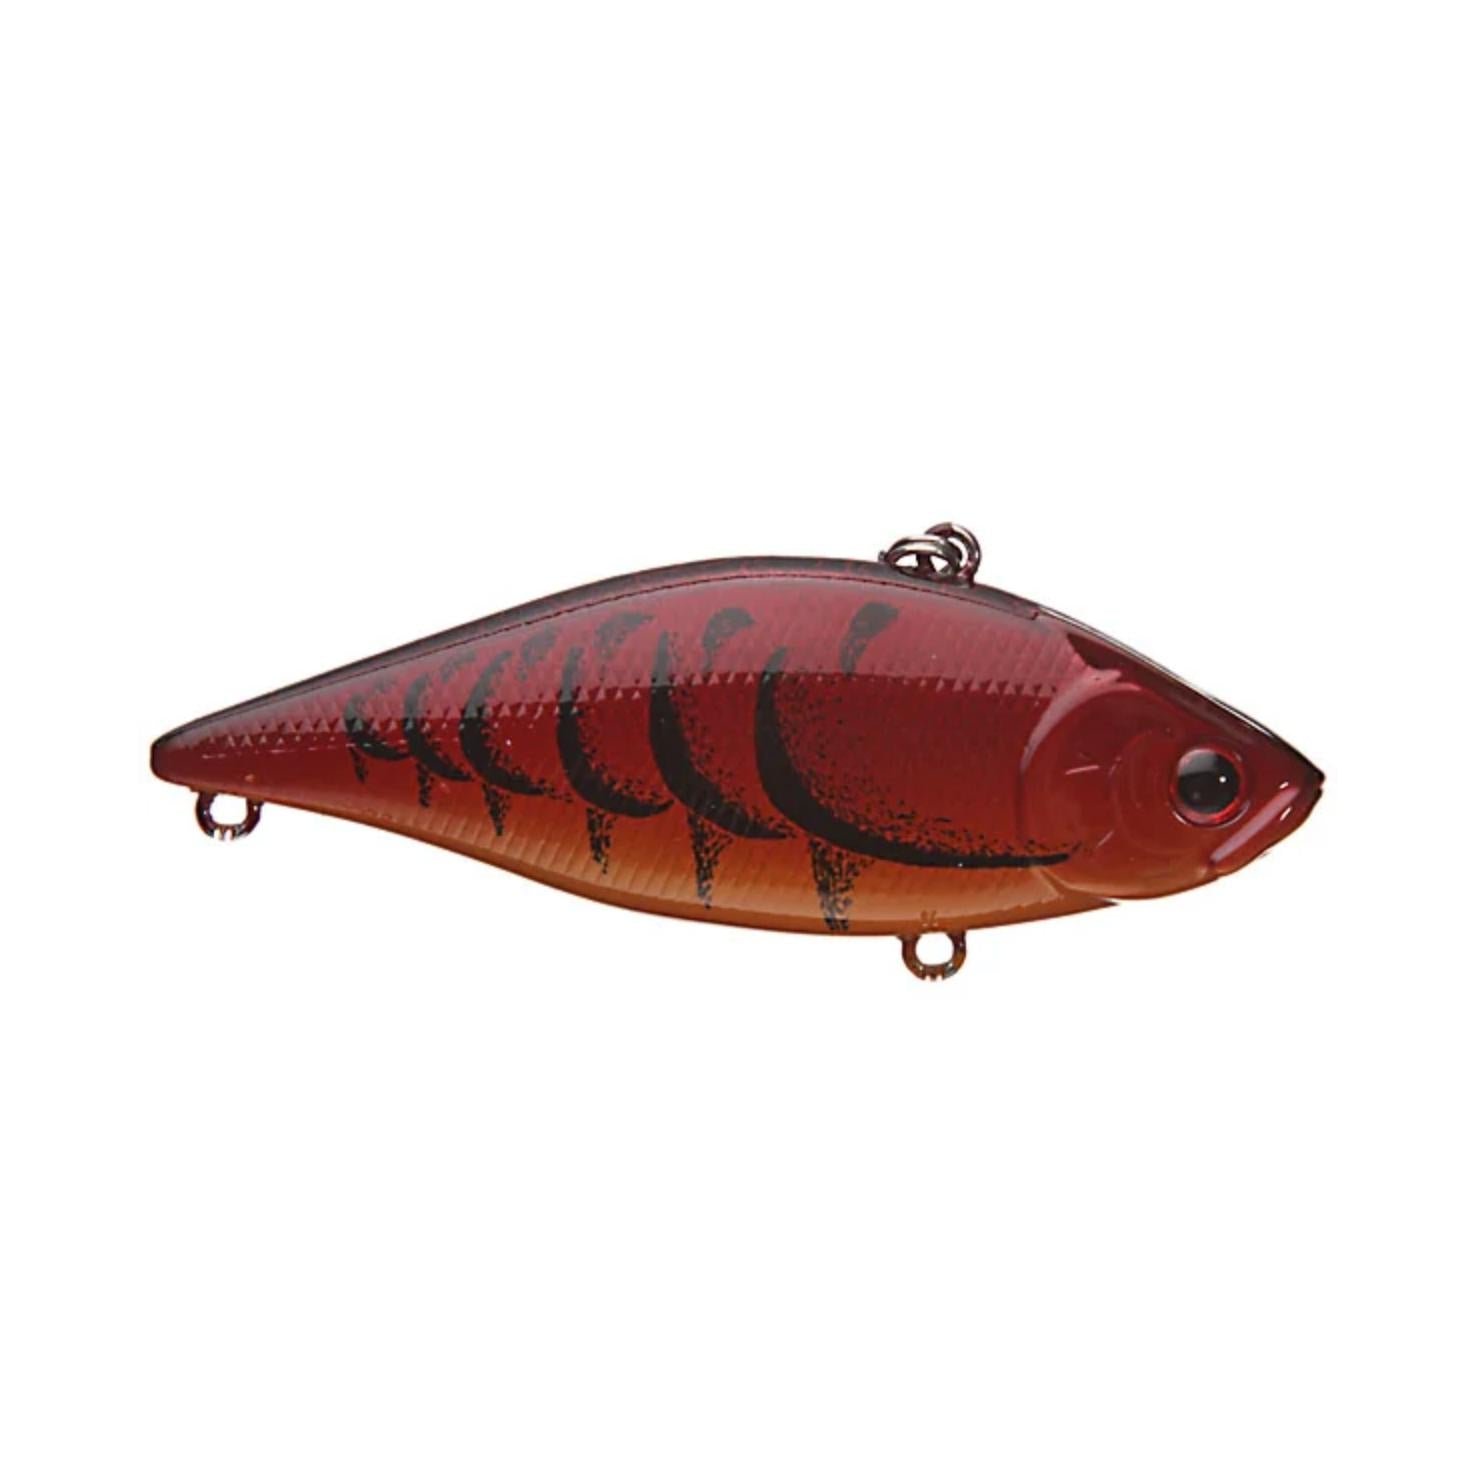 Lure Review- Lucky Craft LV 